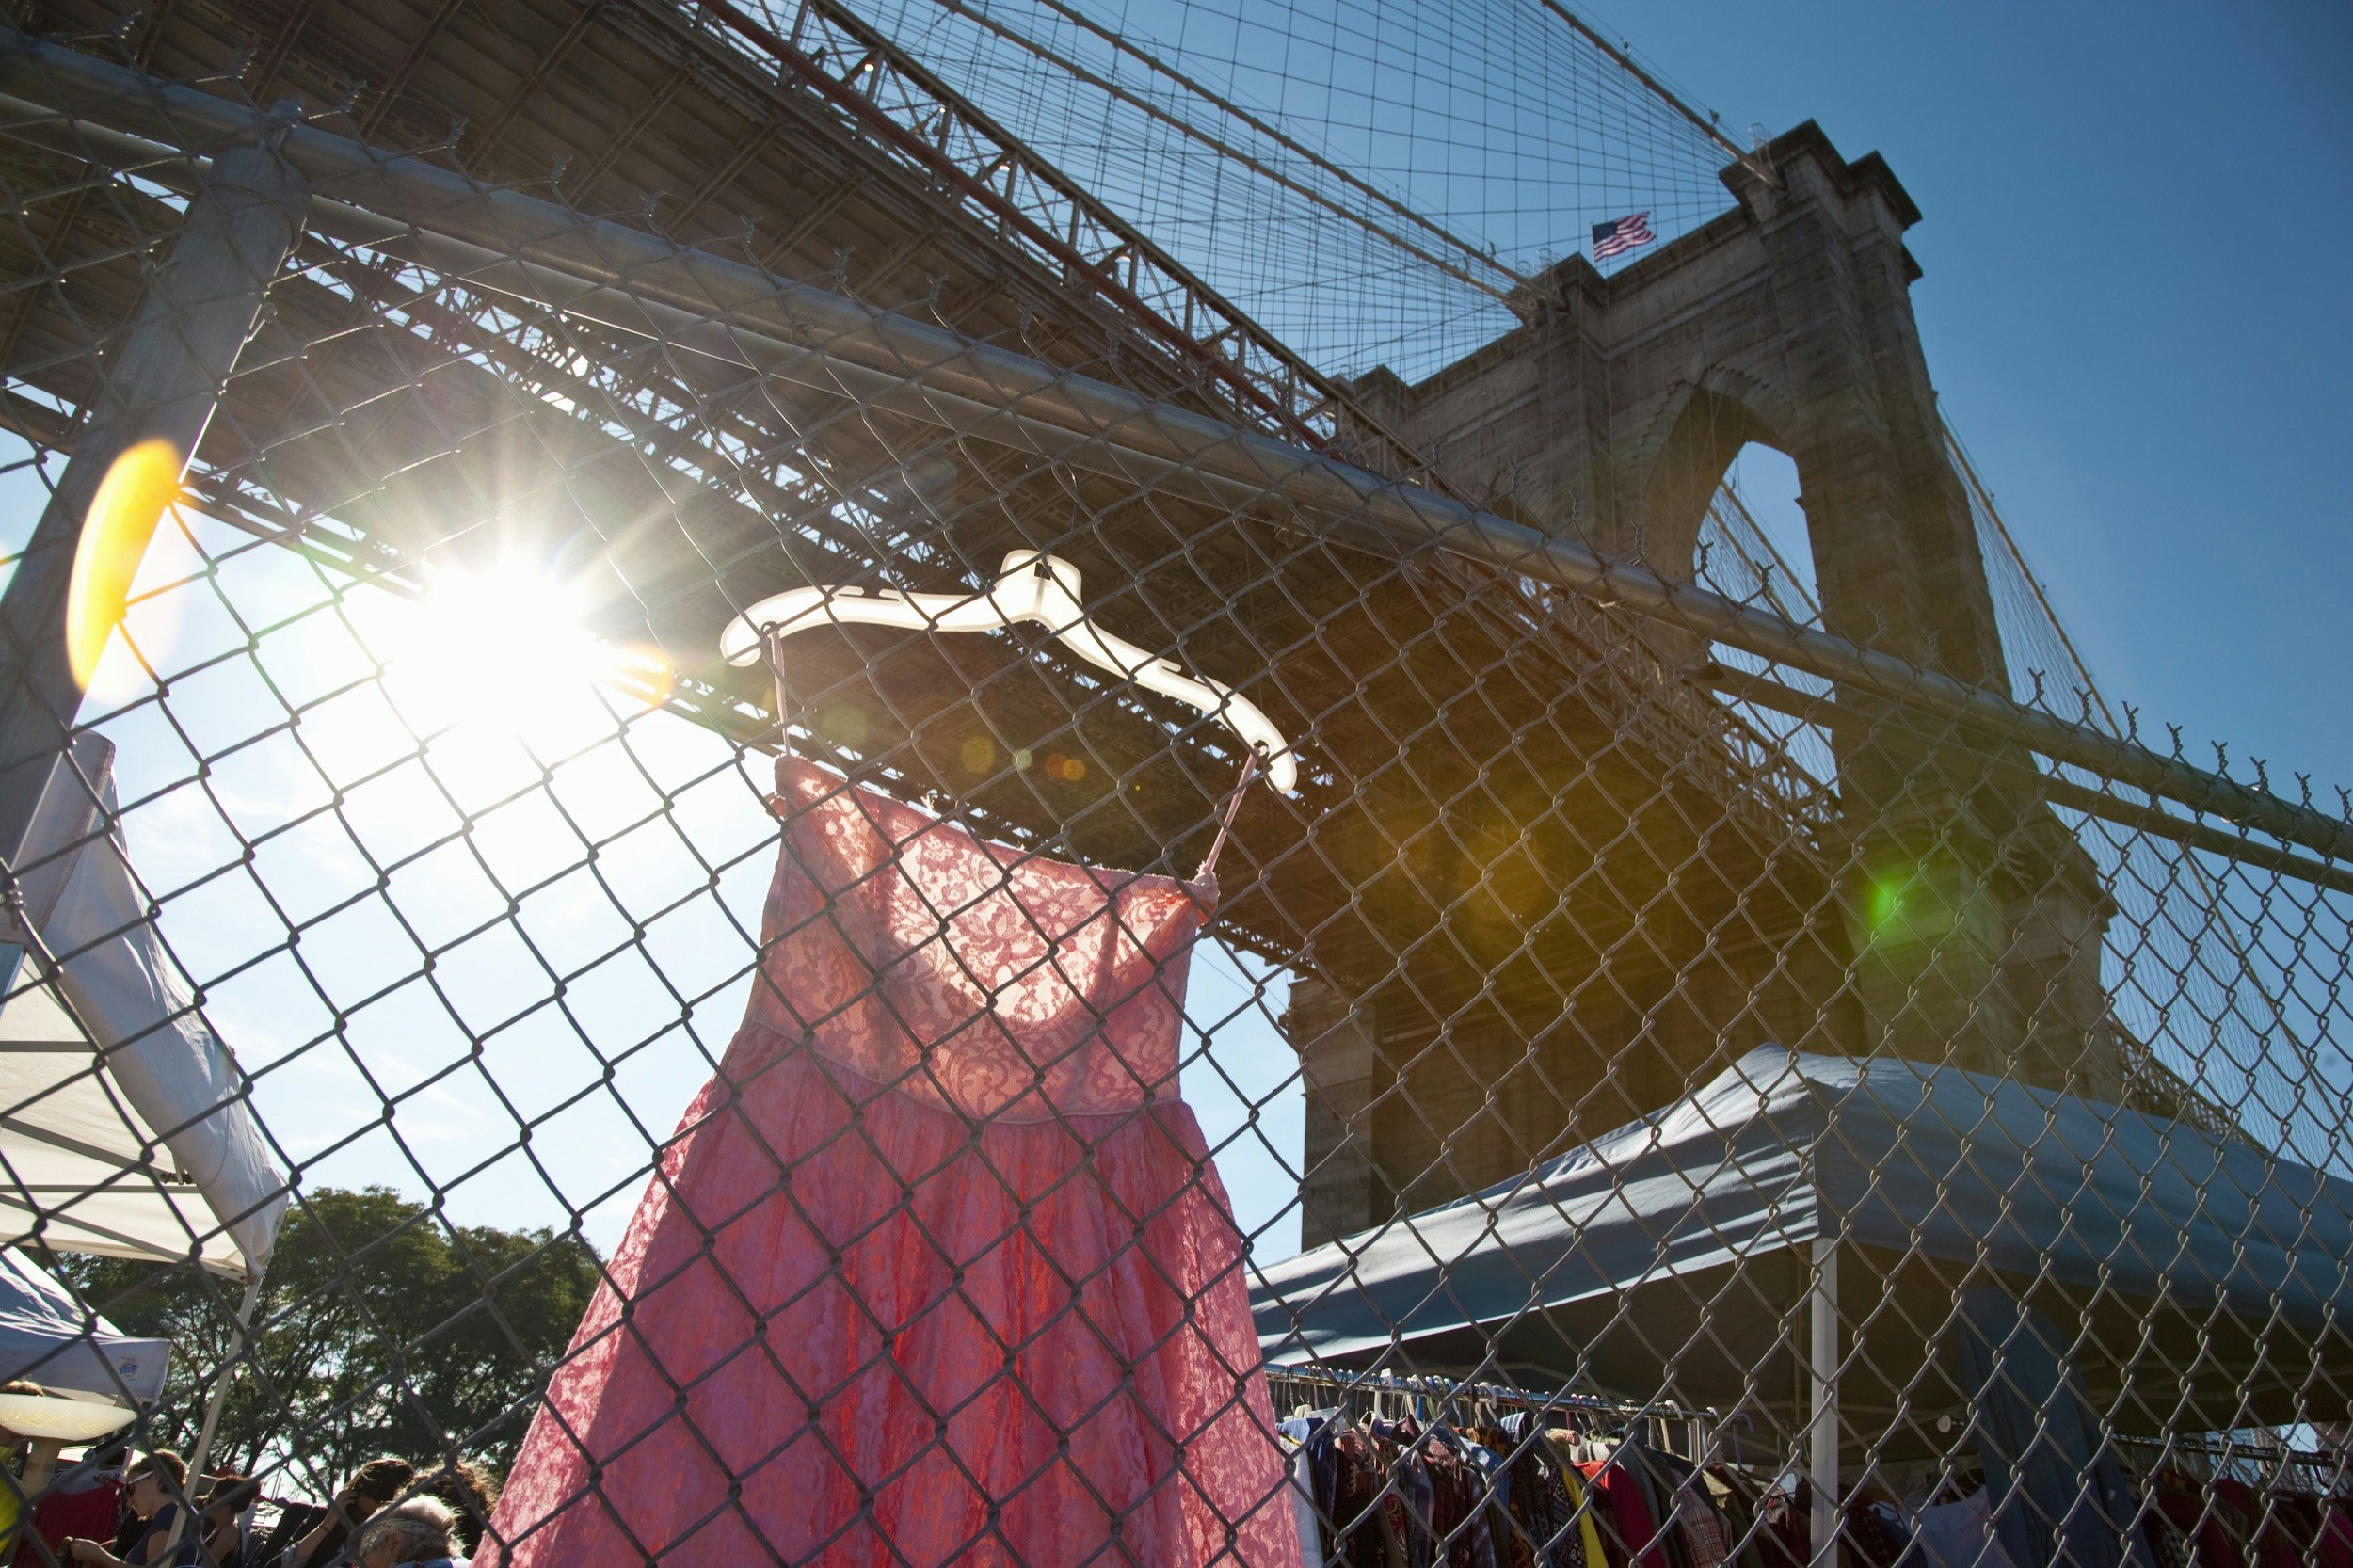 A pink dress hangs on a fence in front of the Brooklyn Bridge in New York City in Winter